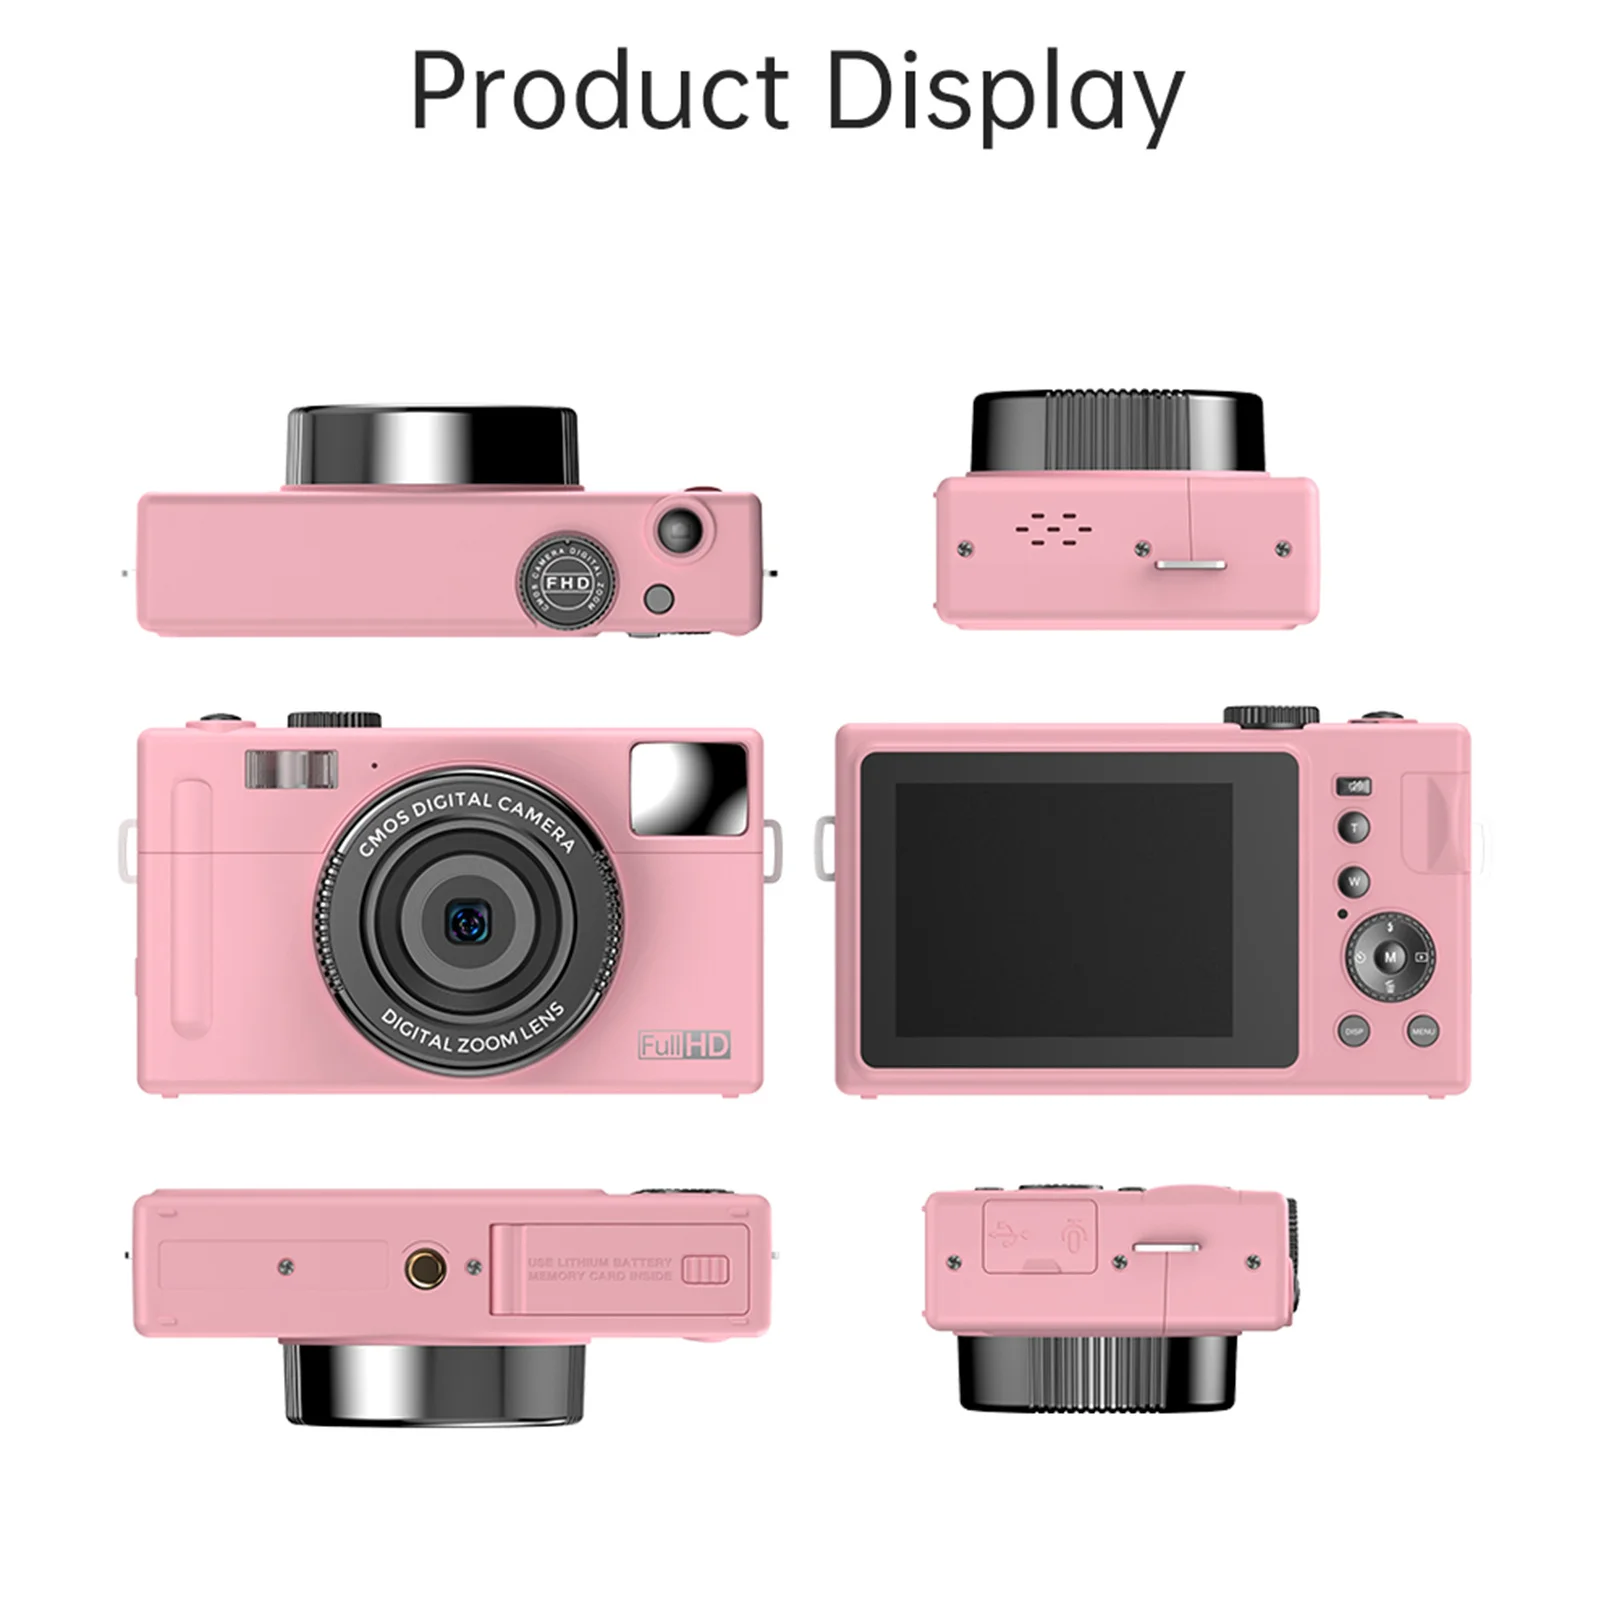 1080P Compact Digital Camera Video Camcorder 48MP 3.0-inch TFT LCD Screen Built-in Flash for Kids Teens Friends Gift Recommend enlarge